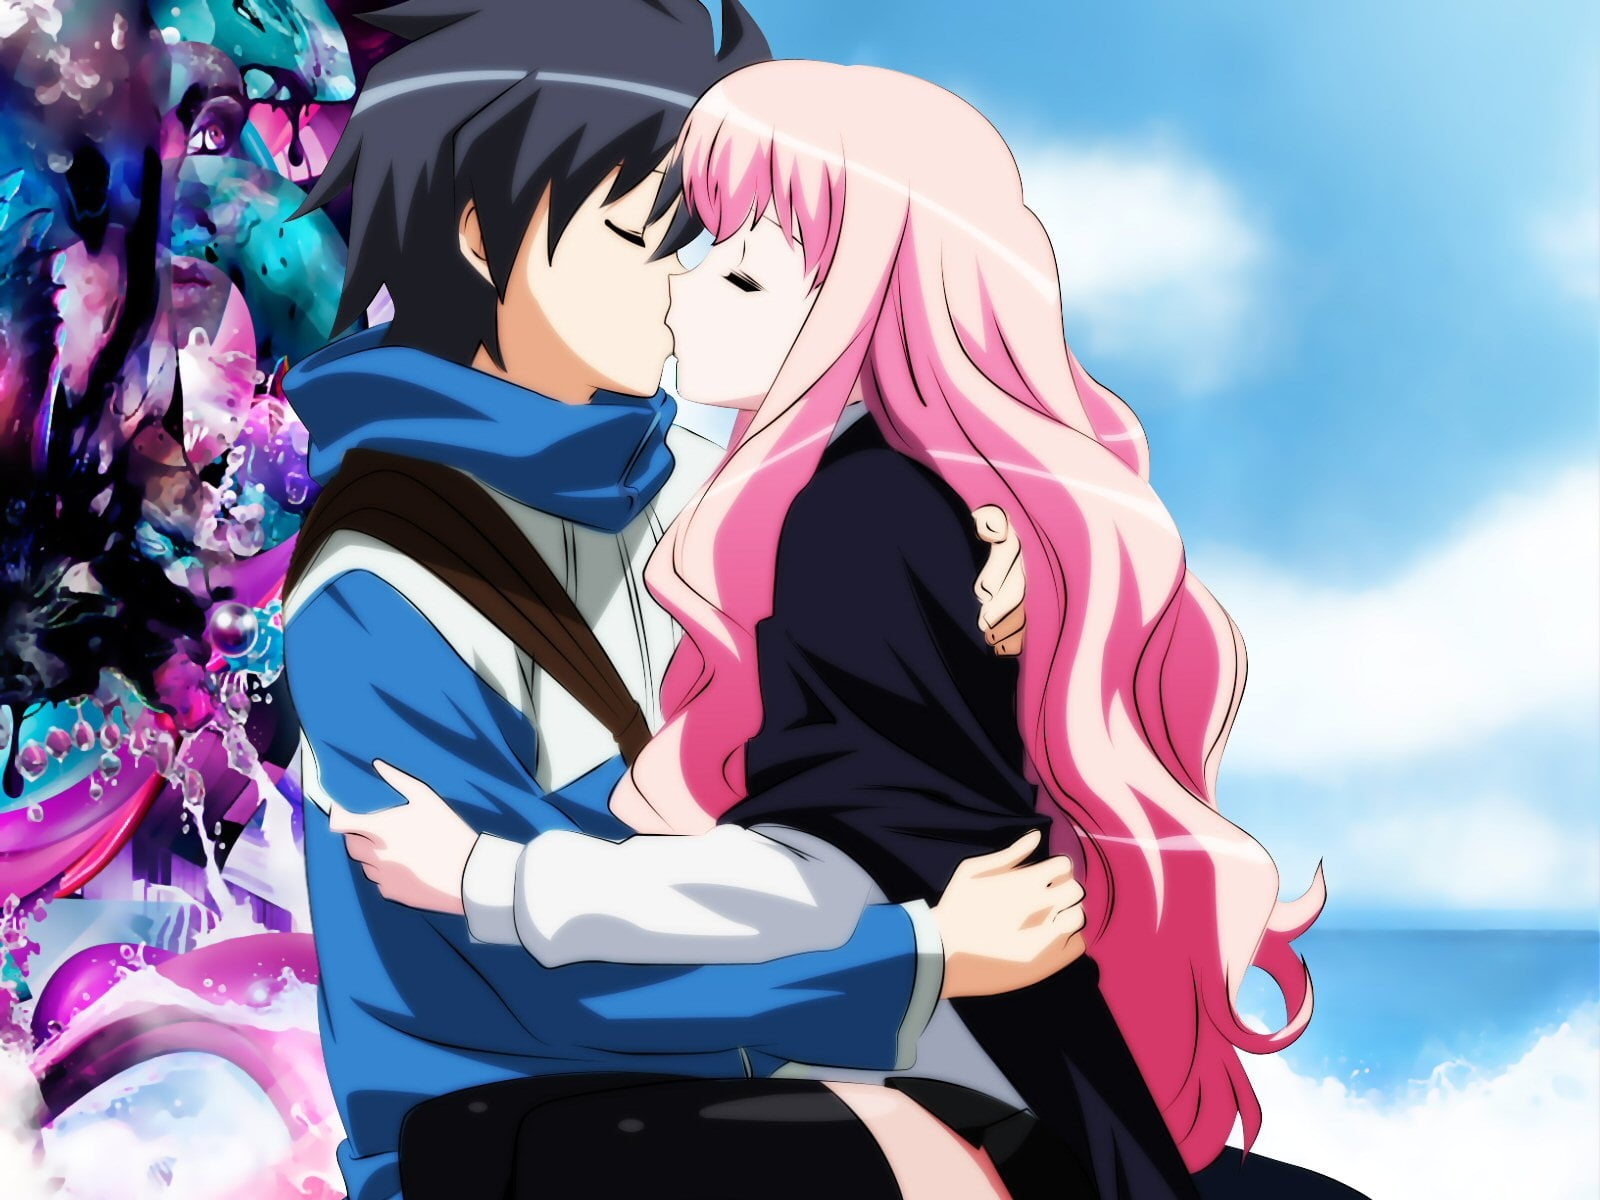 A Kiss  Other  Anime Background Wallpapers on Desktop Nexus Image 356949